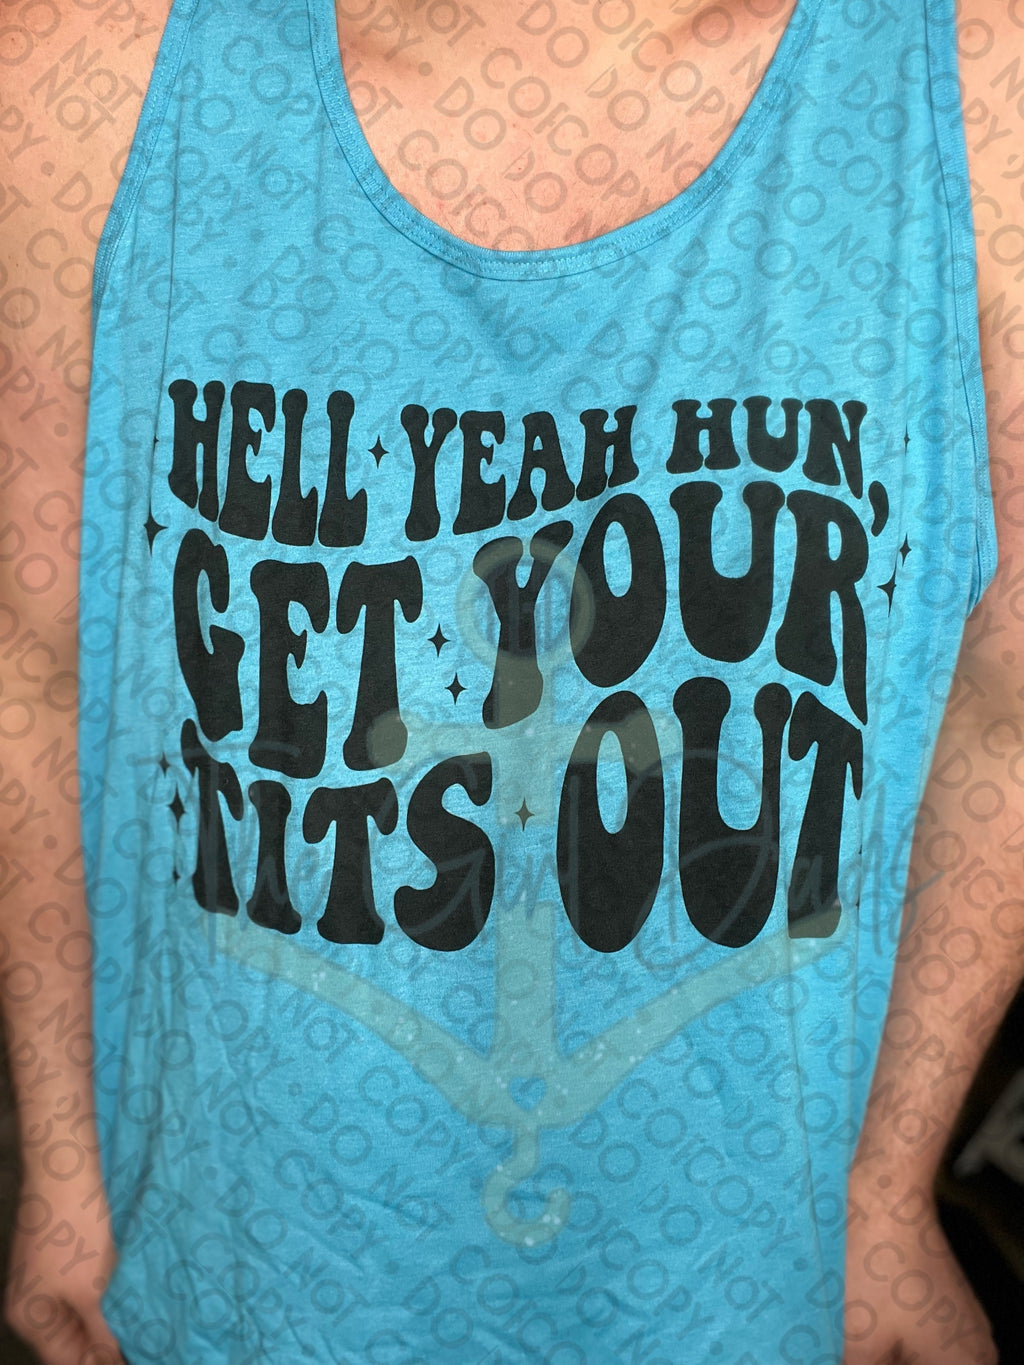 Hell Yeah Hun, Get Your Tits Out (Front & Back) Top Design